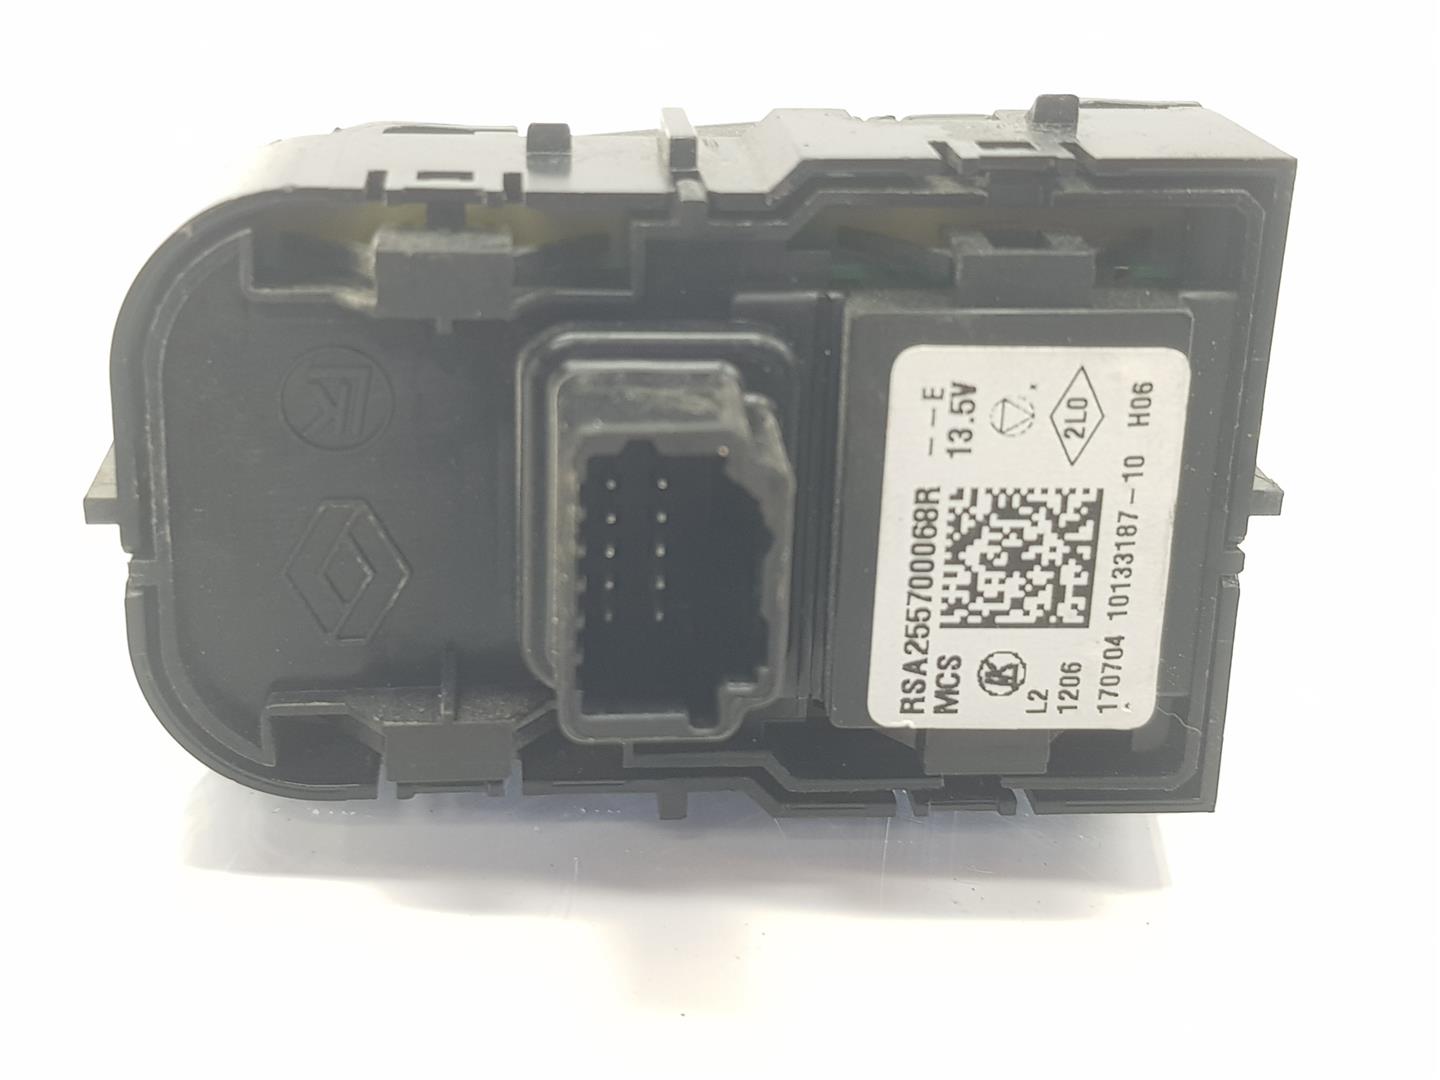 RENAULT Clio 3 generation (2005-2012) Other Control Units 255700068R, 255700068R 19826748